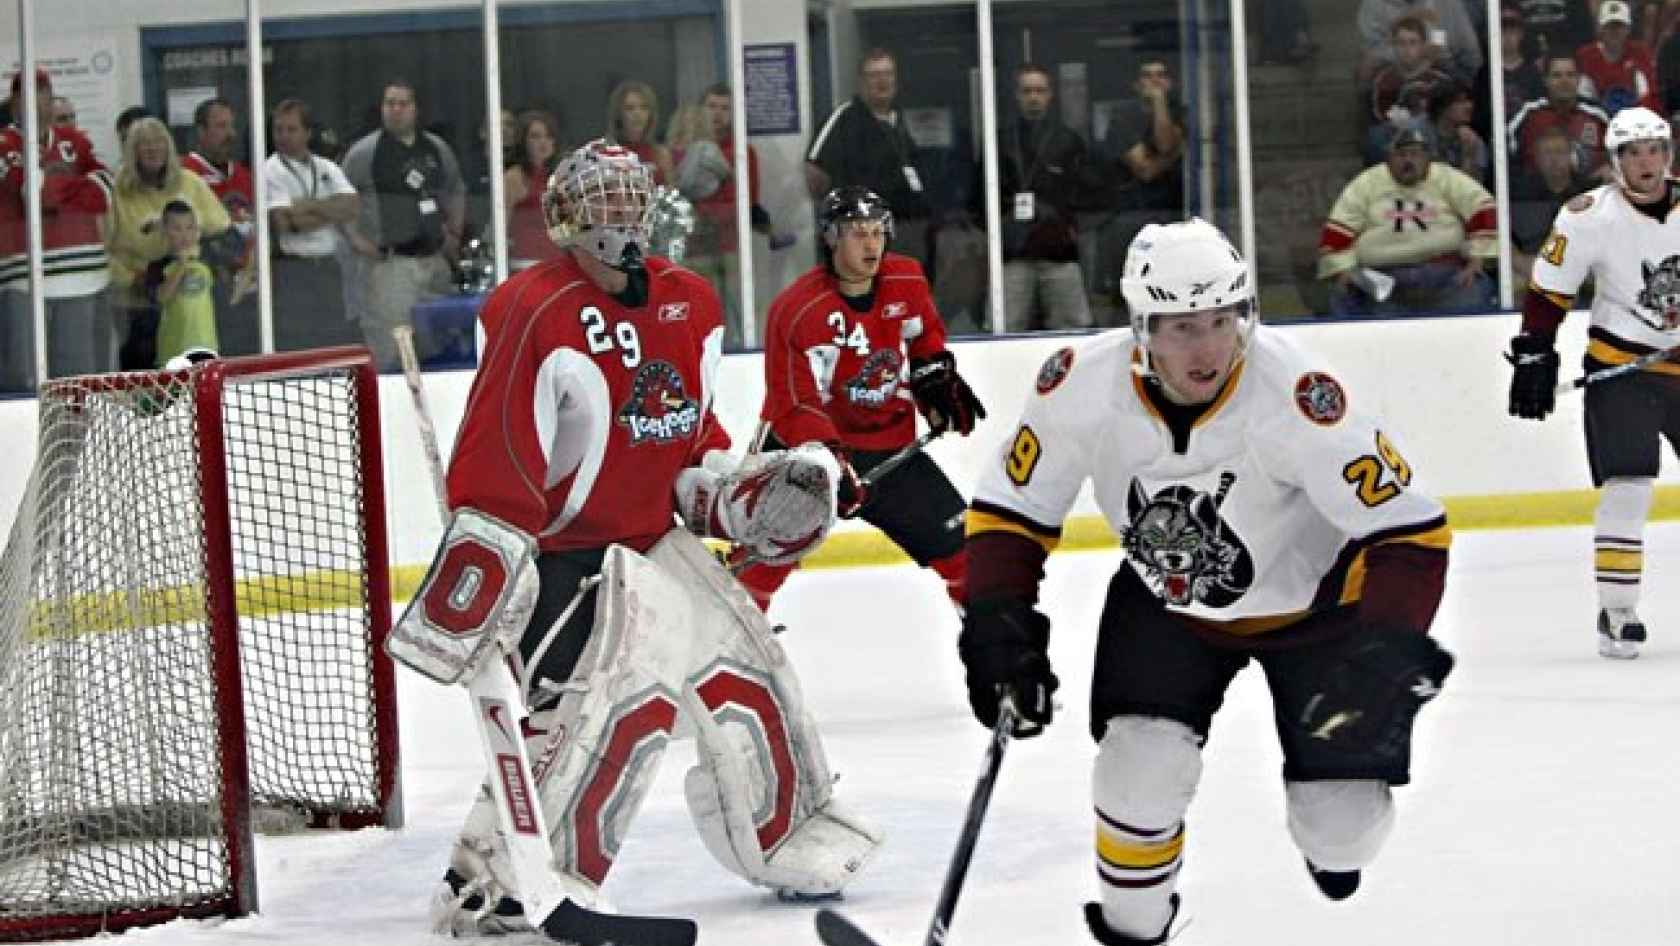 Rockford IceHogs ICEHOGS PRESEASON GAME MOVED TO CARLSON ICE ARENA